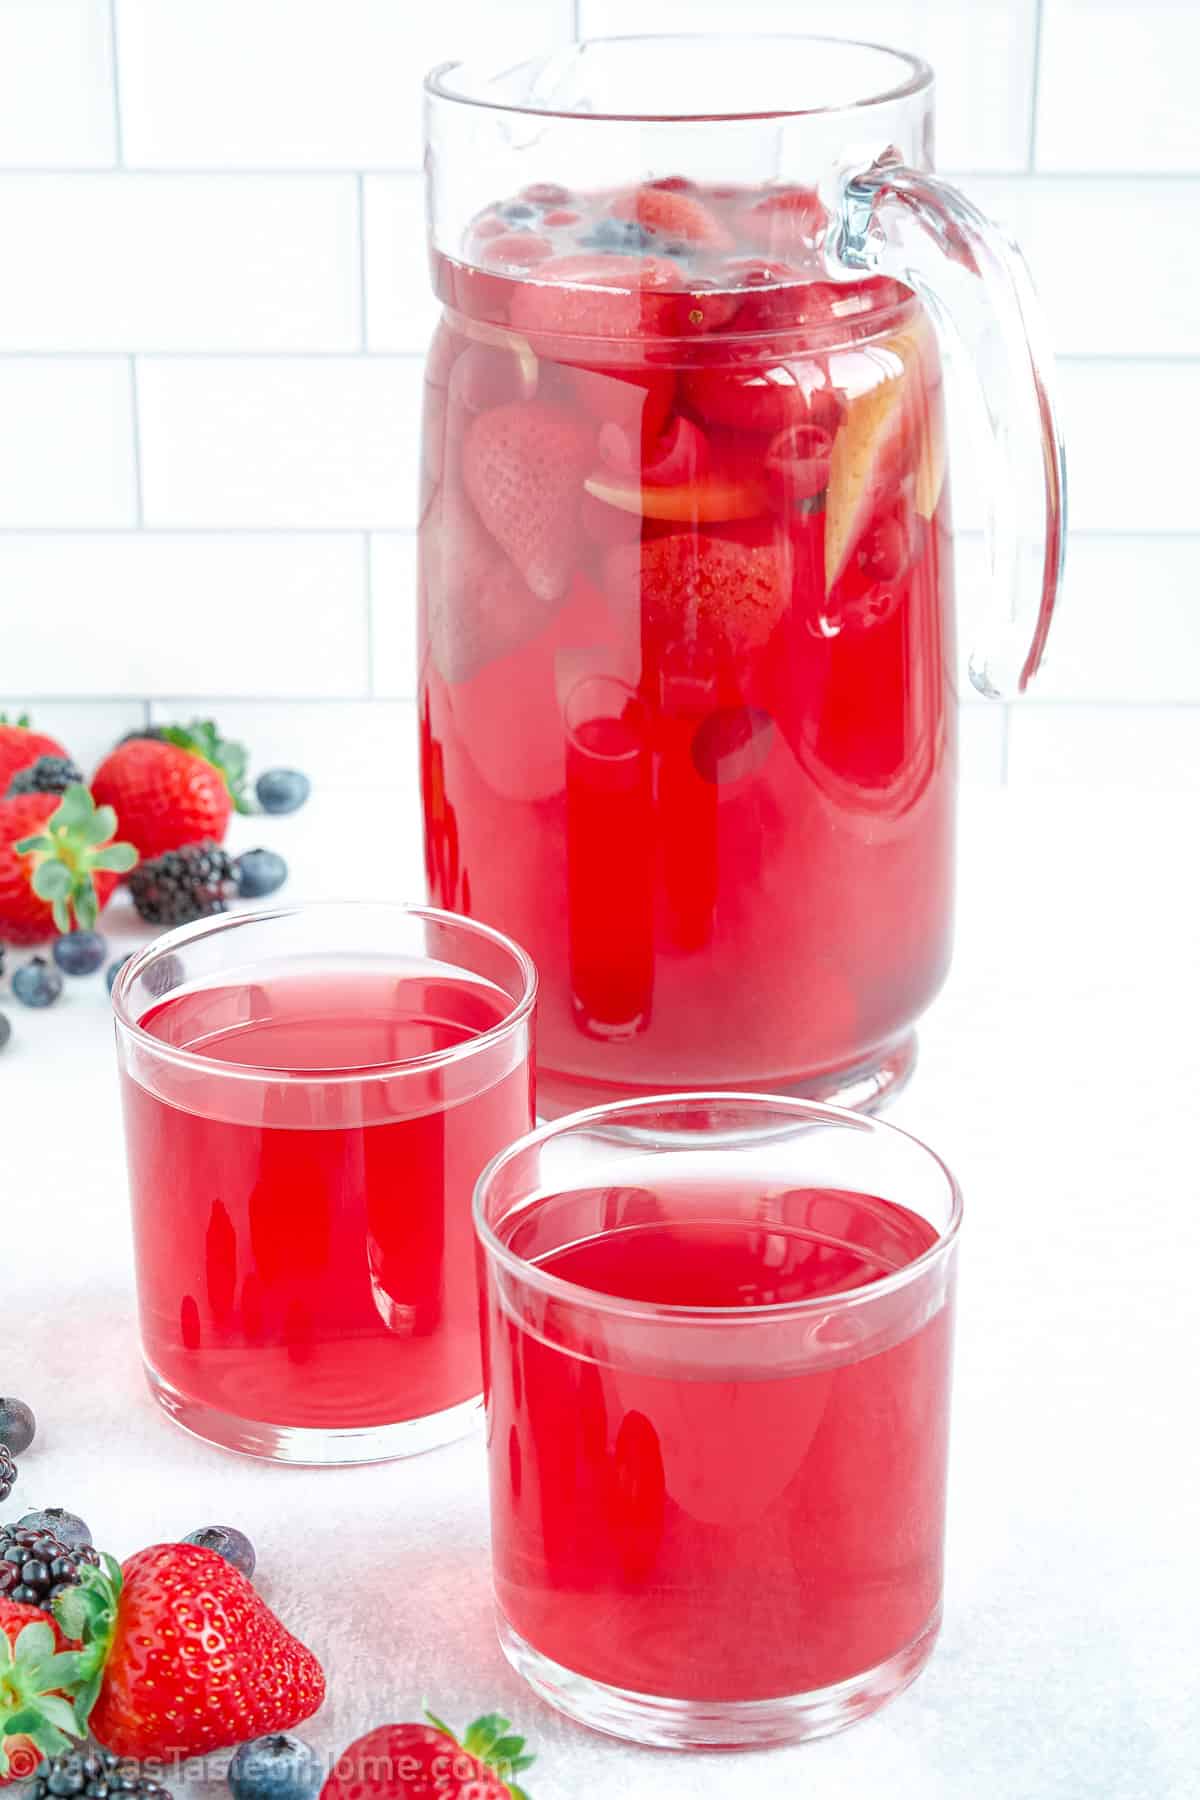 This Kompot recipe will teach you exactly how to make this traditional non-alcoholic fruit drink that’s incredibly popular in Eastern Europe, especially Ukraine and Russia. 